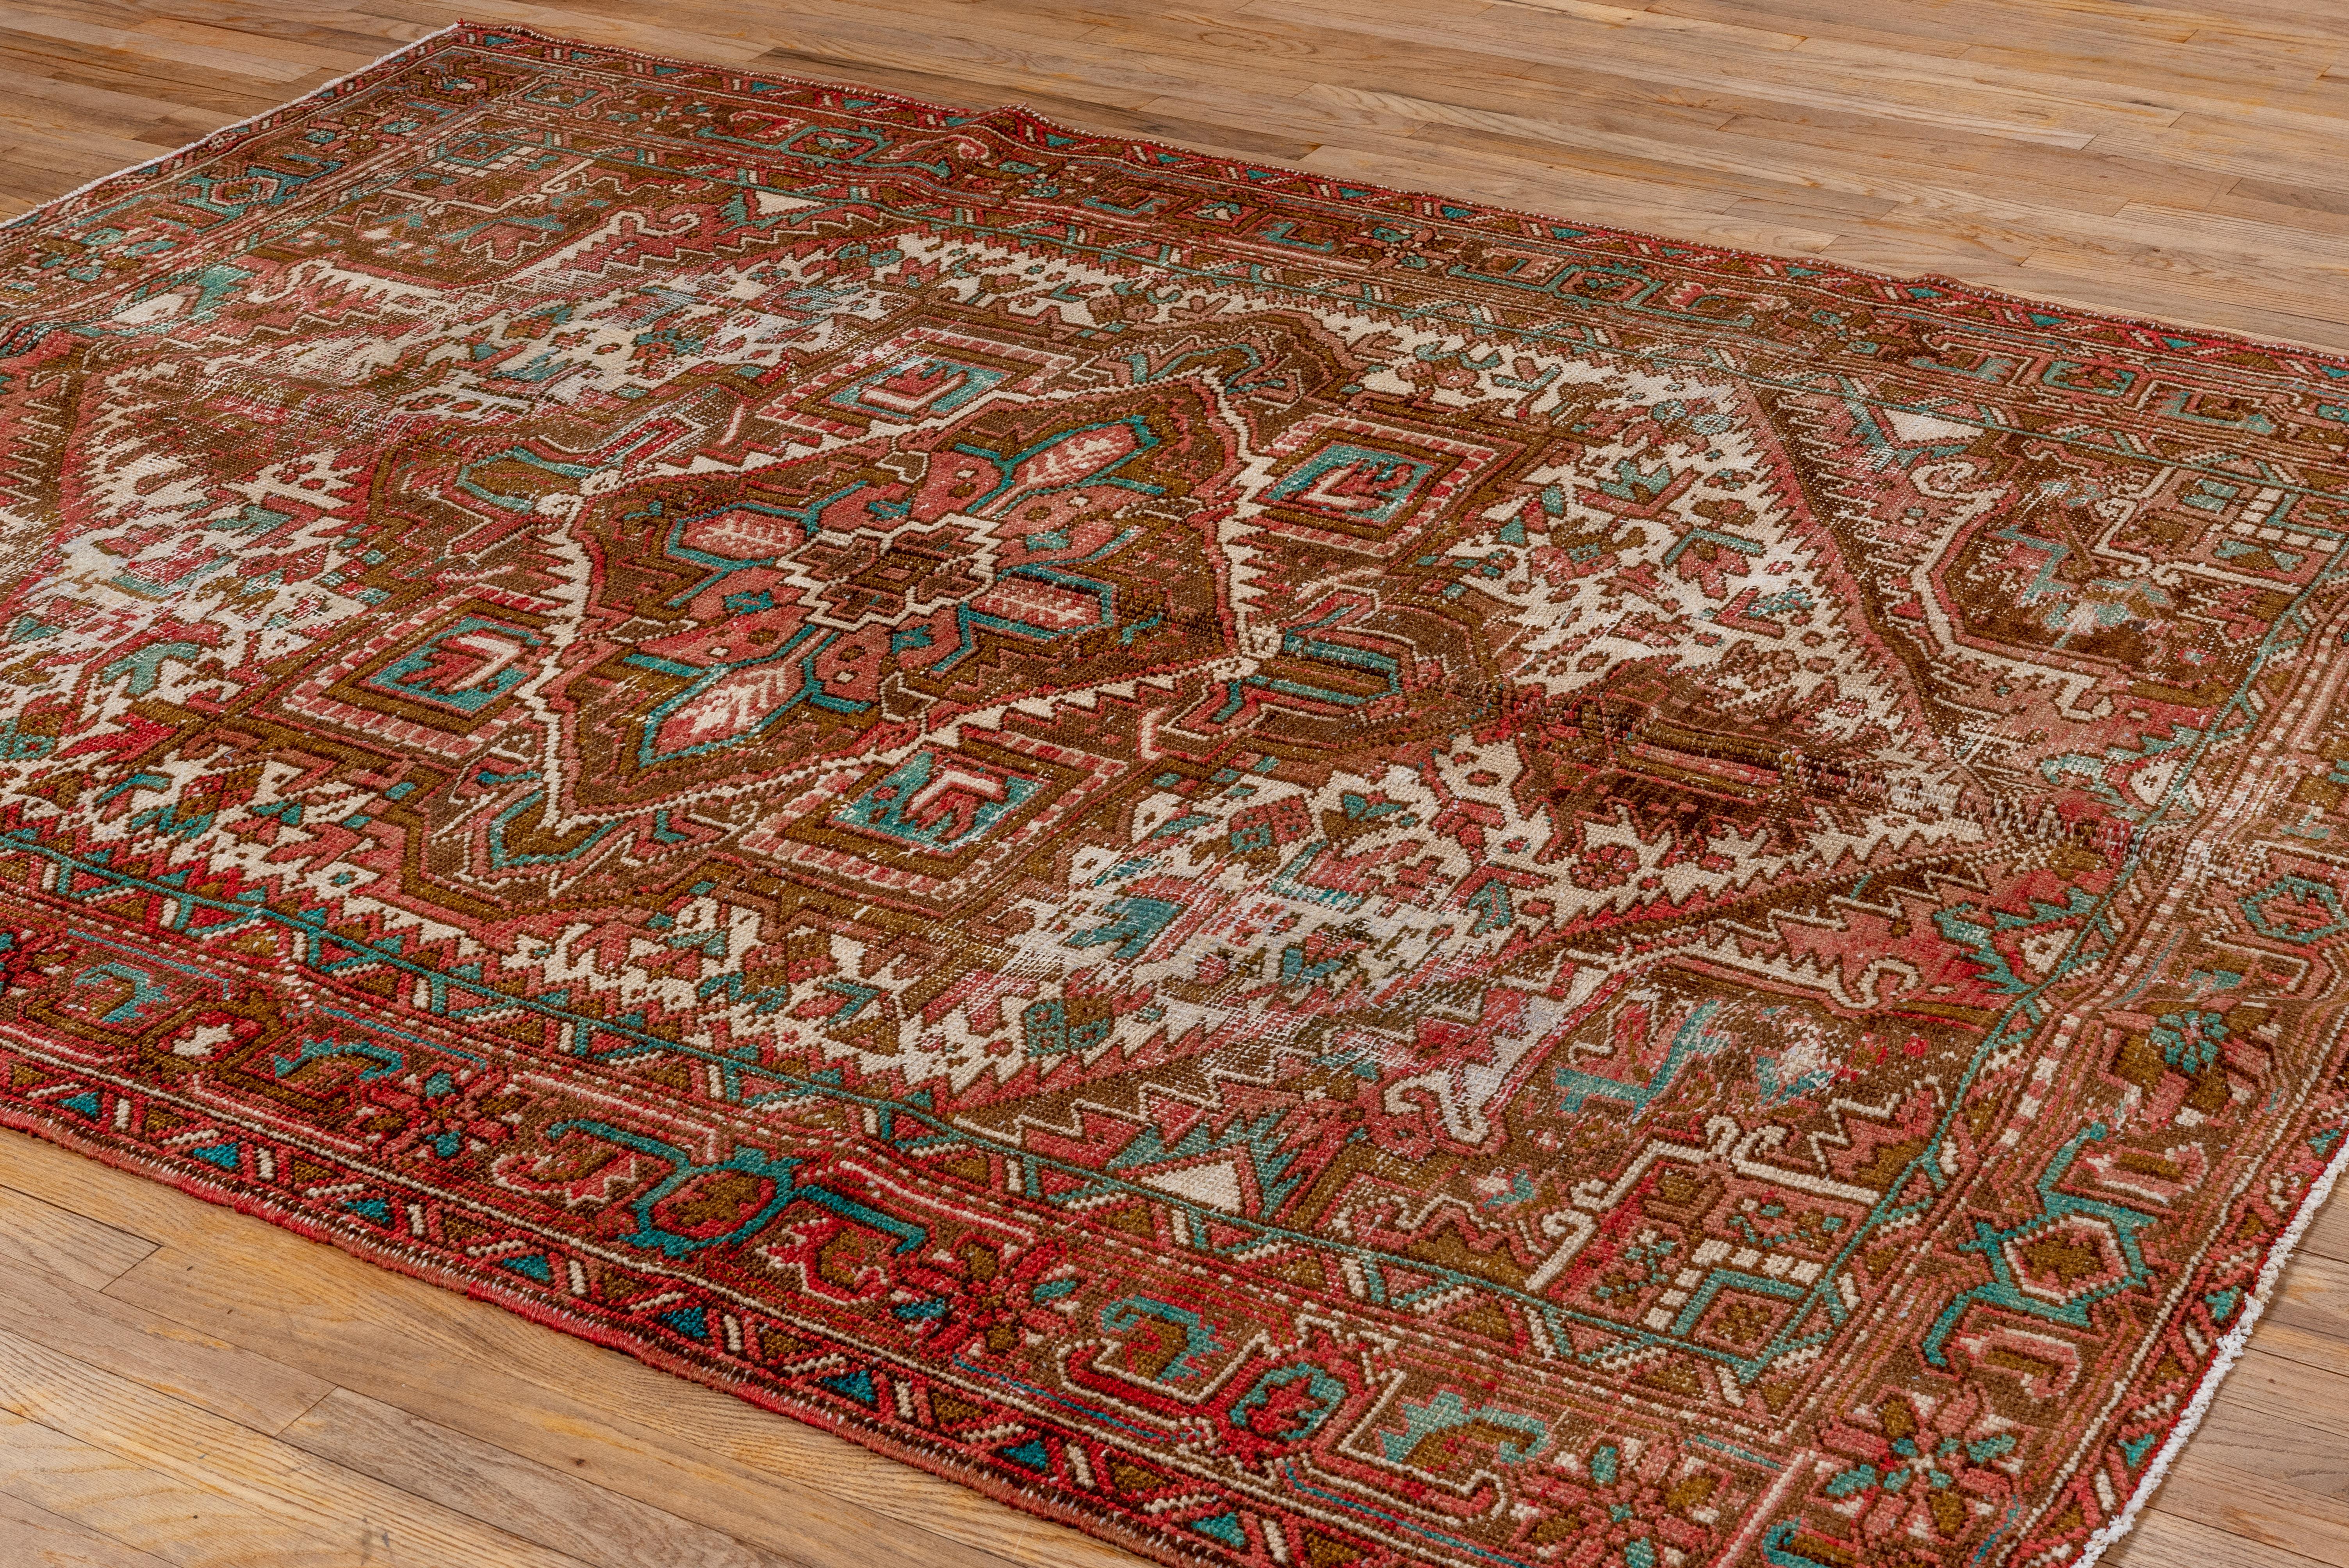 Heriz rugs are a type of handwoven Persian rug originating from the city of Heris, located in the northwest region of Iran. These rugs are known for their distinctive style, durability, and rich cultural heritage. Heriz rugs are highly regarded and